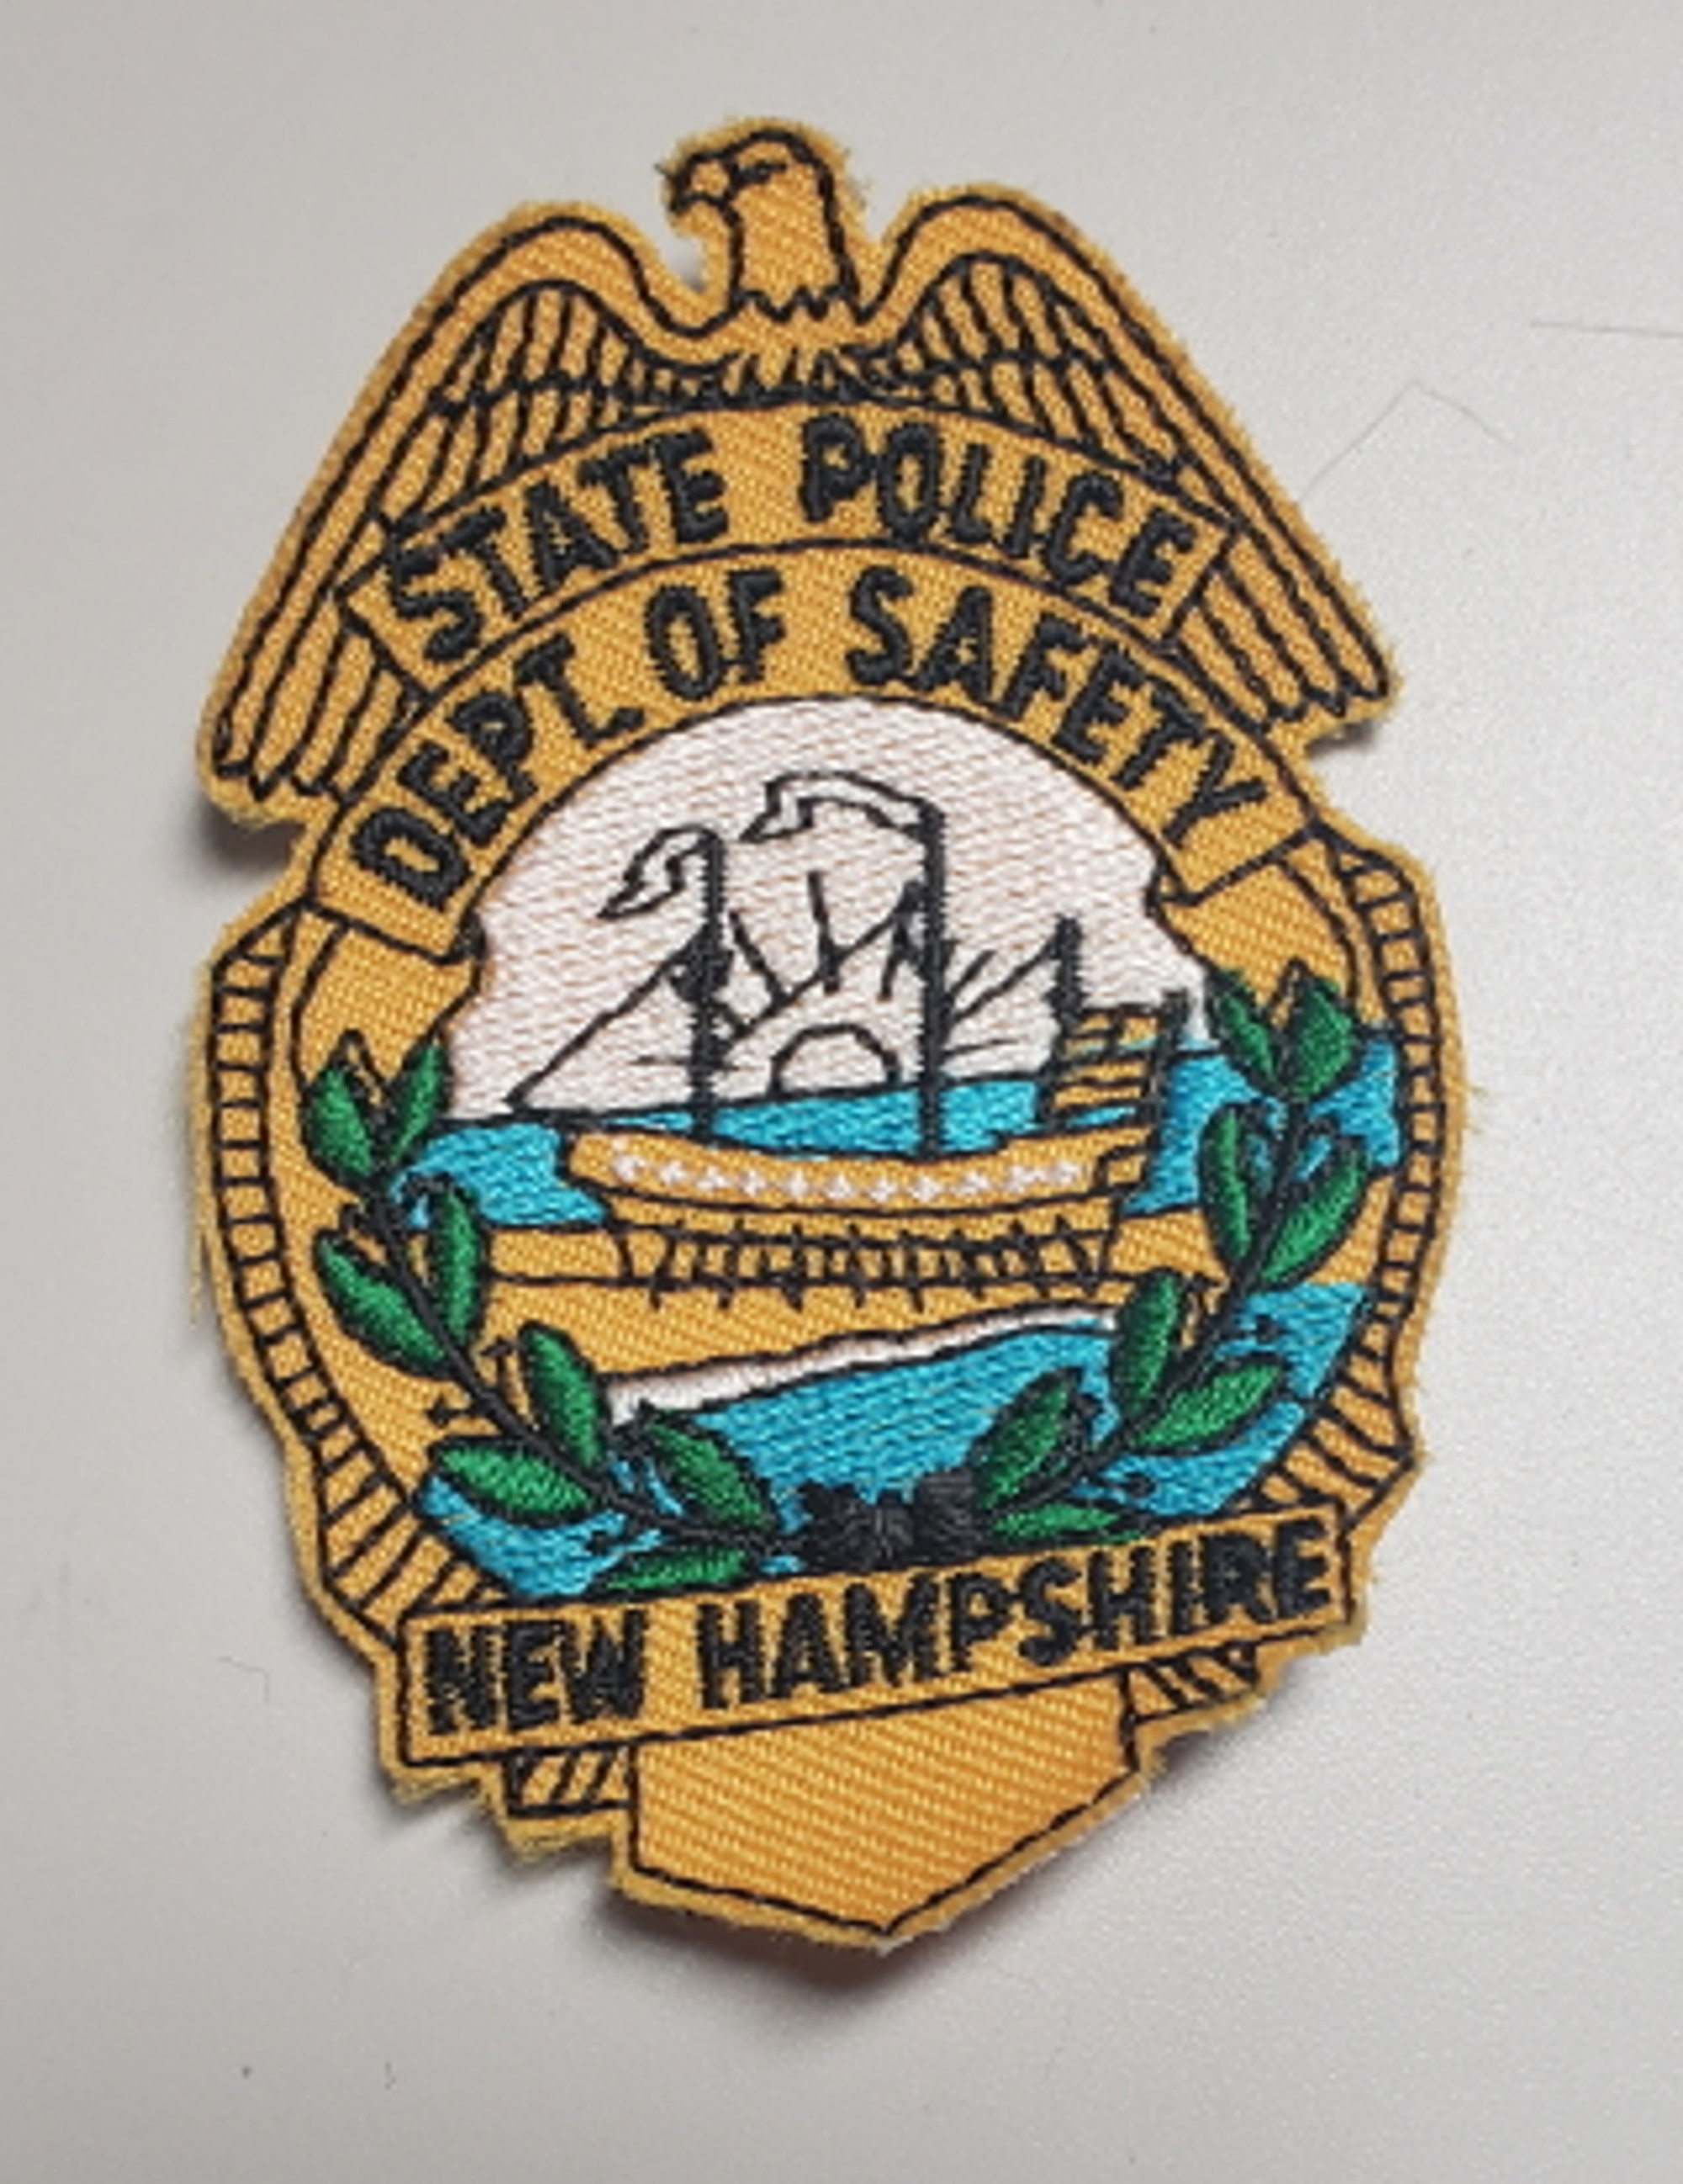 New Hampshire State Police Patch